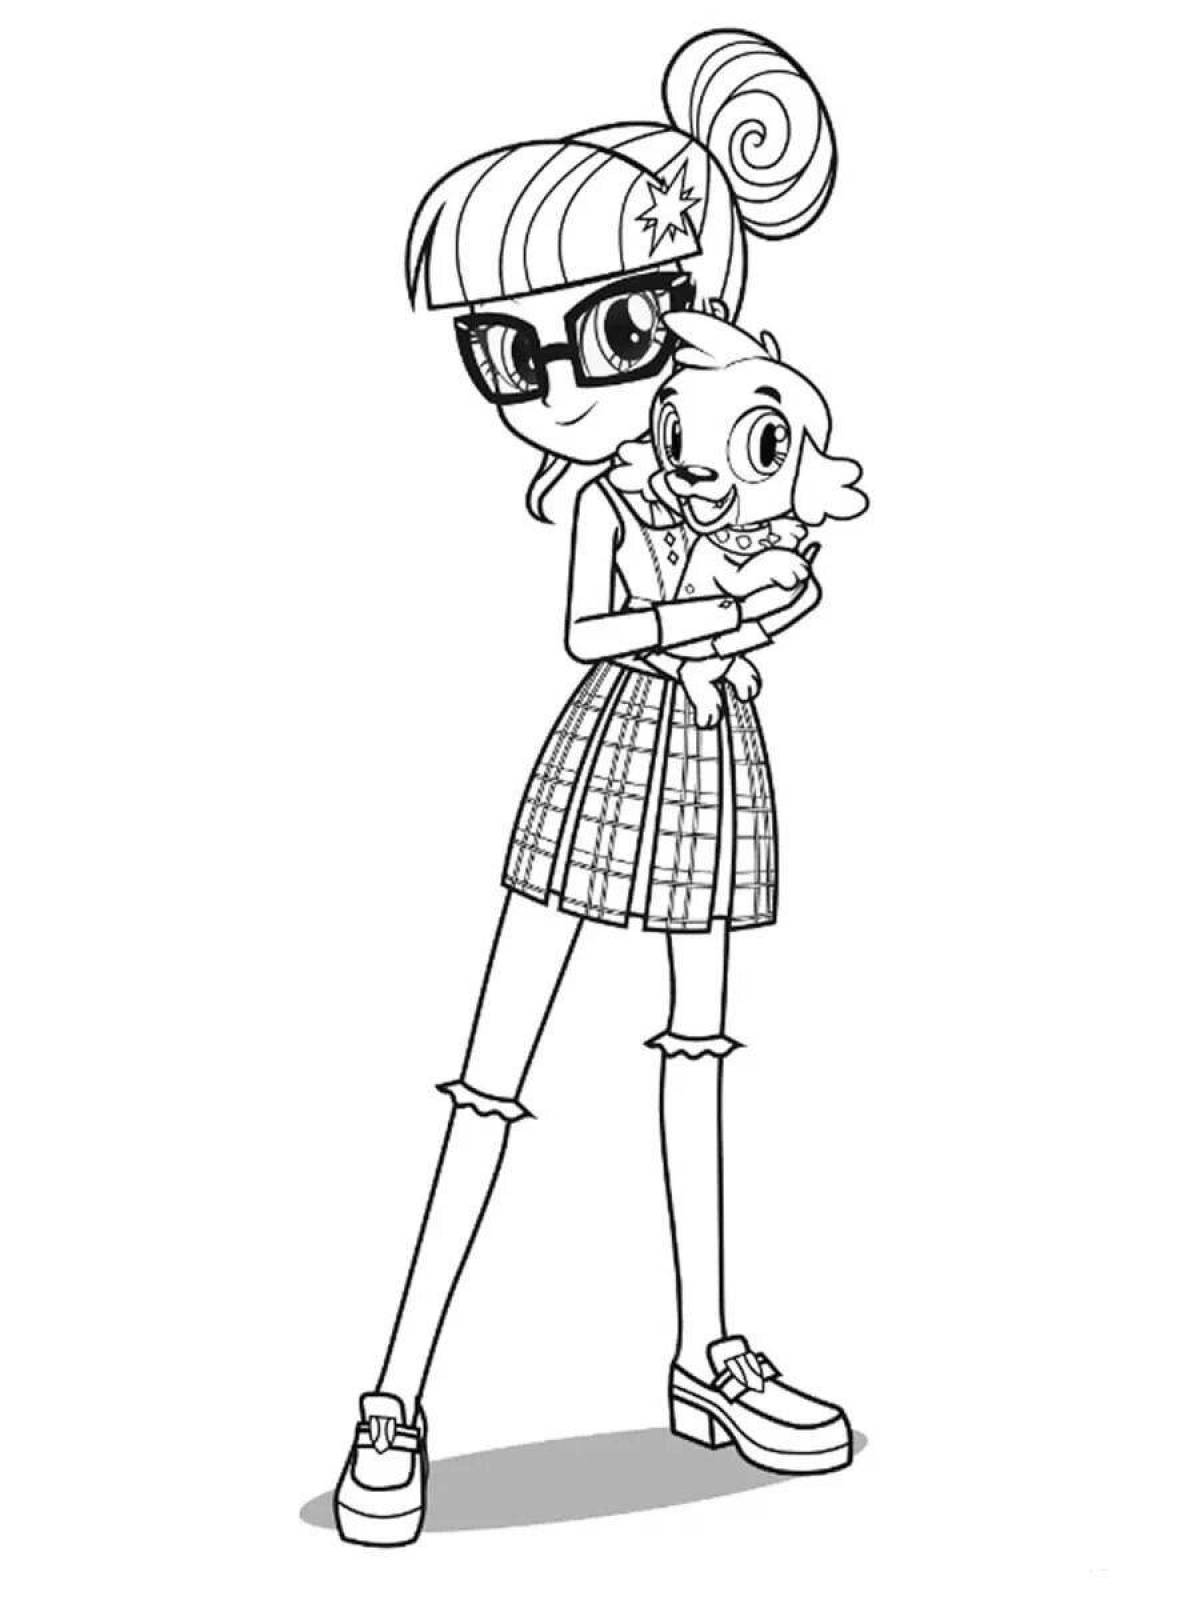 Coloring page glamor equestria girl sparkle